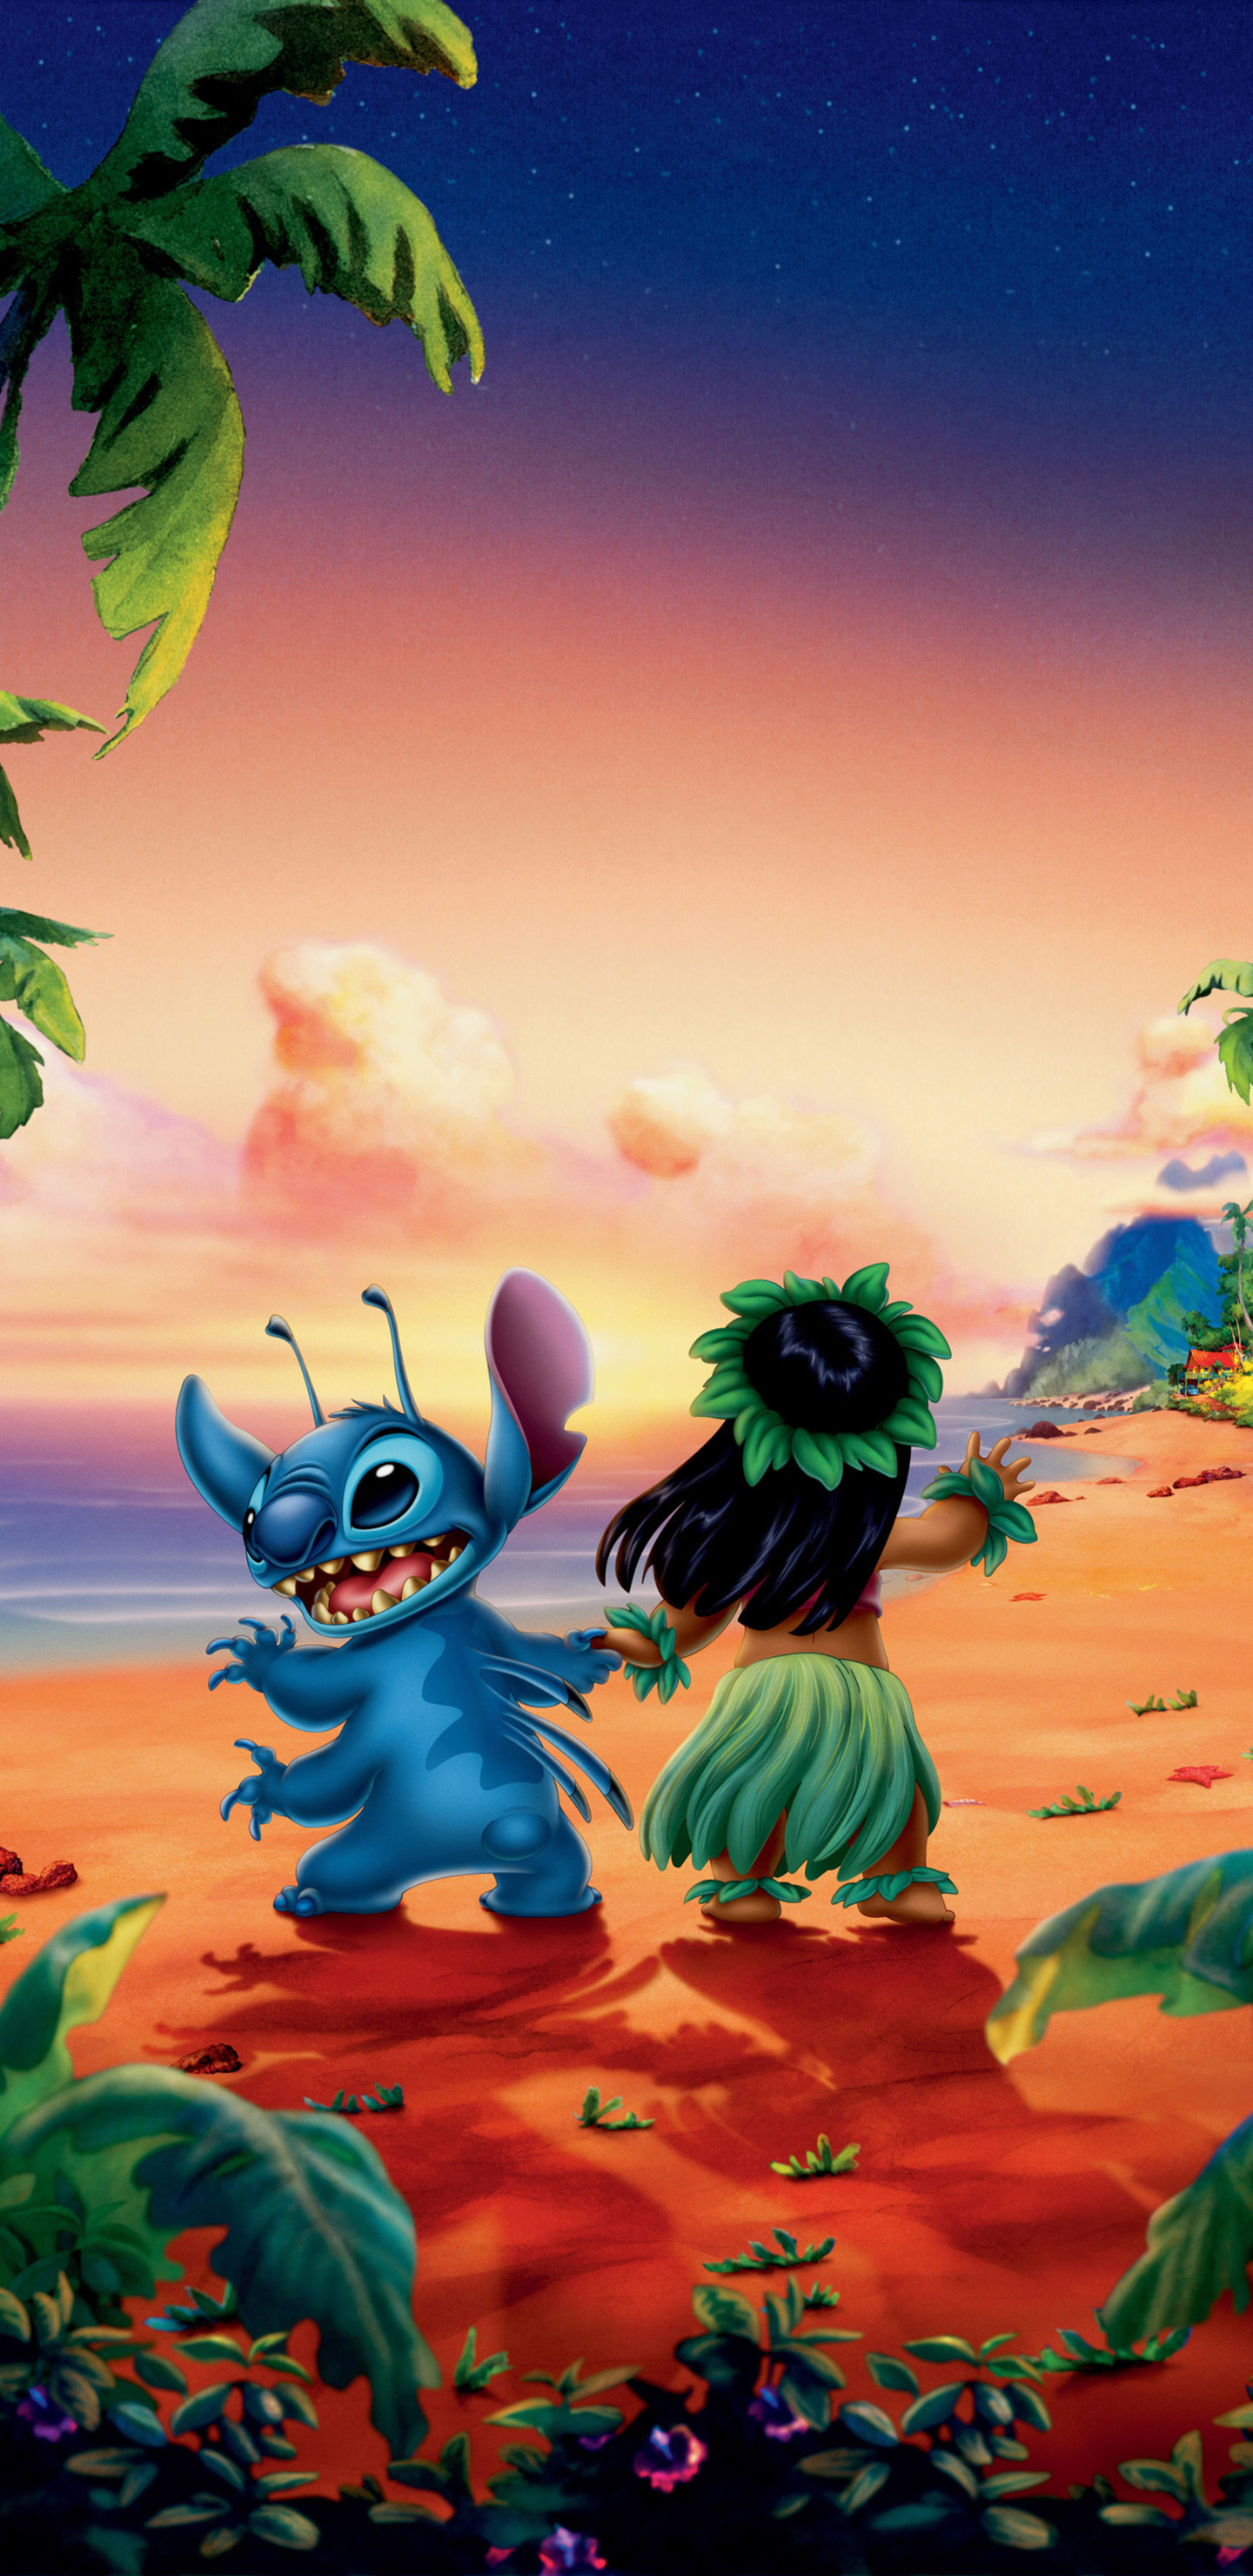 Stitch Themed Wallpaper  Iphone Wallpaper Girly Cartoon  Iphone  wallpaper girly Cartoon wallpaper iphone Wallpaper iphone cute